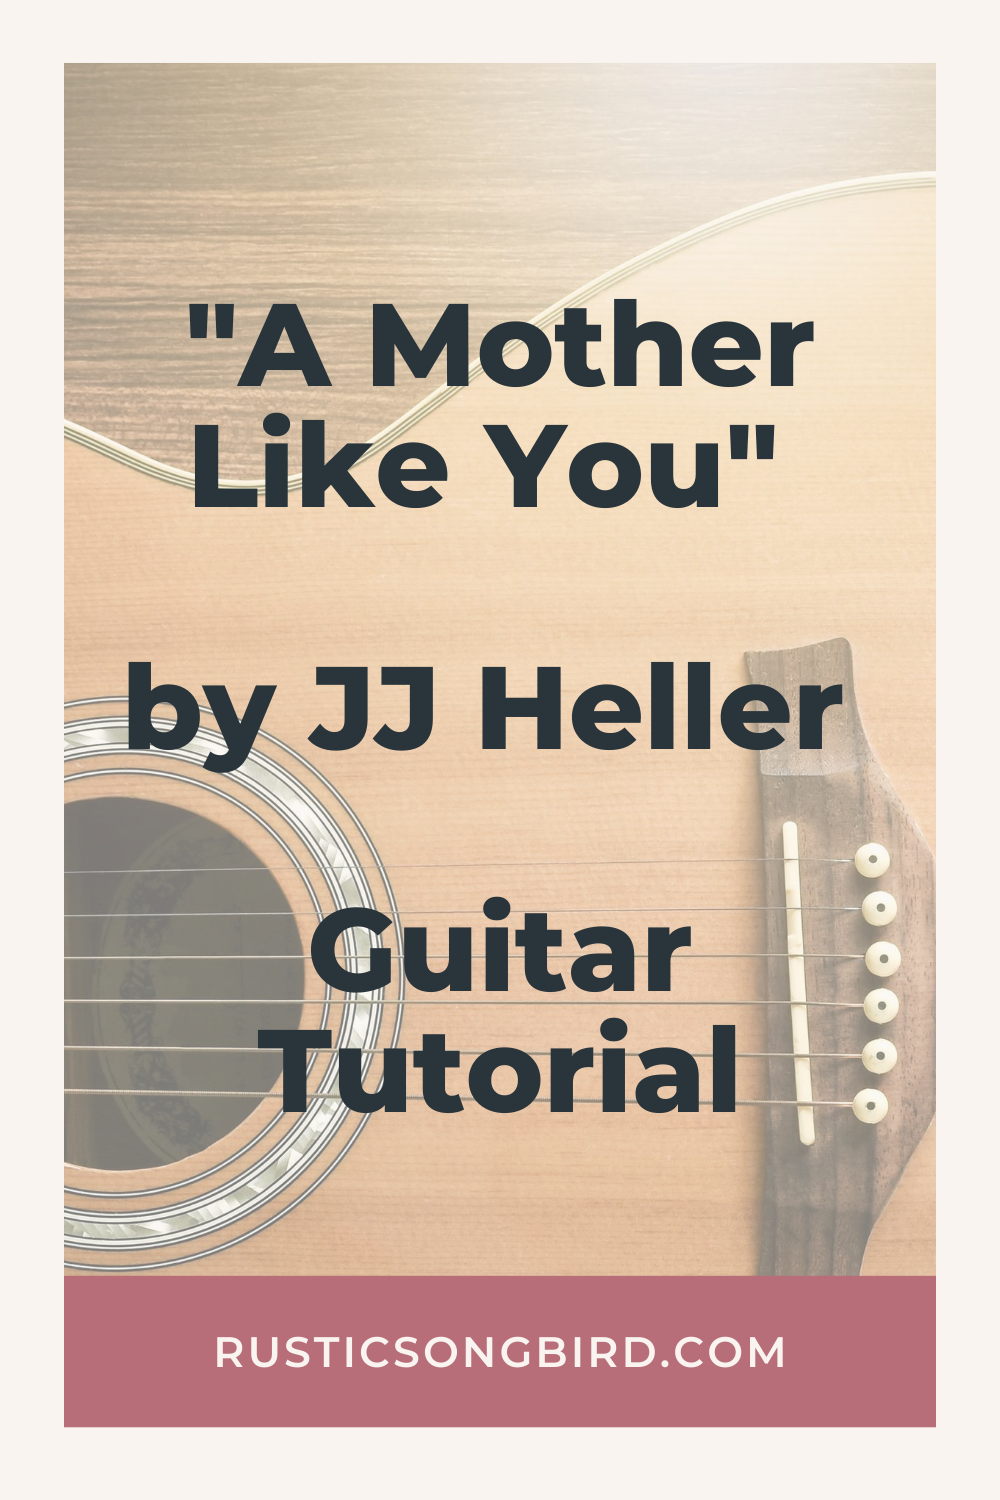 acoustic guitar background with text of the title of the blog post called "A Mother Like You by JJ Heller Guitar Chord Tutorial"